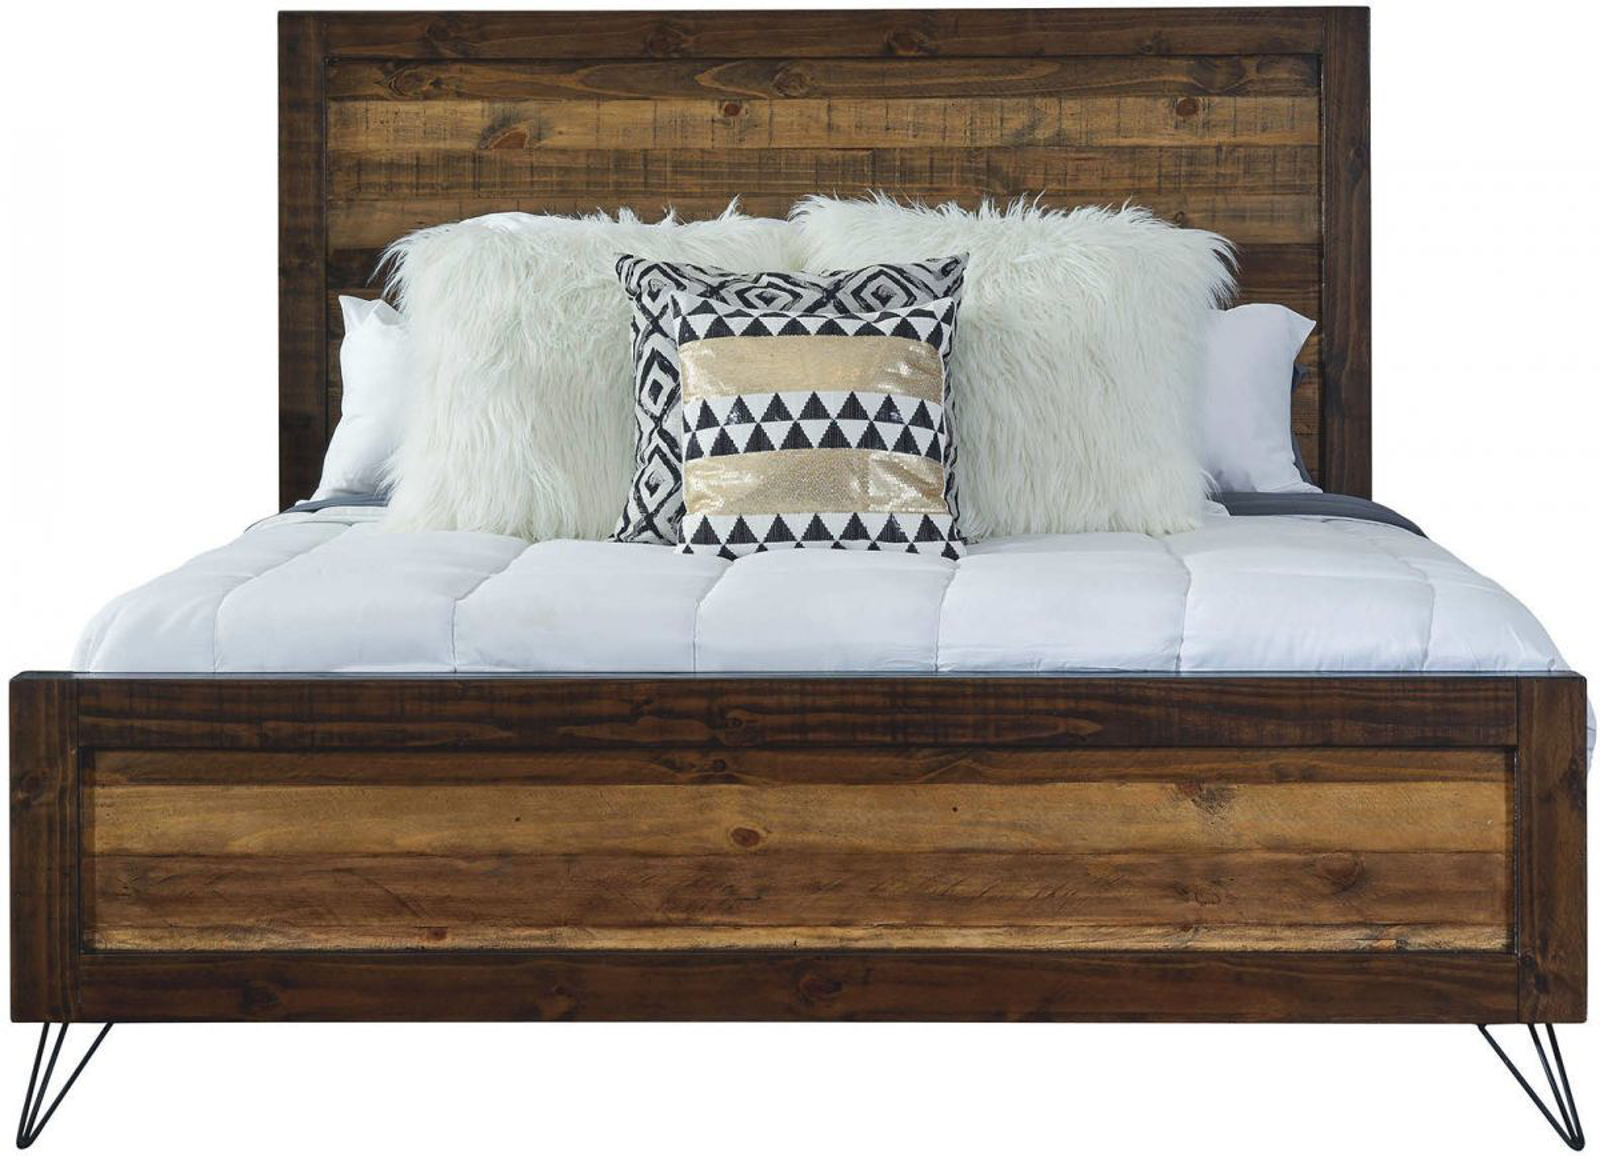 Picture of Elements Cruz King Size Bed